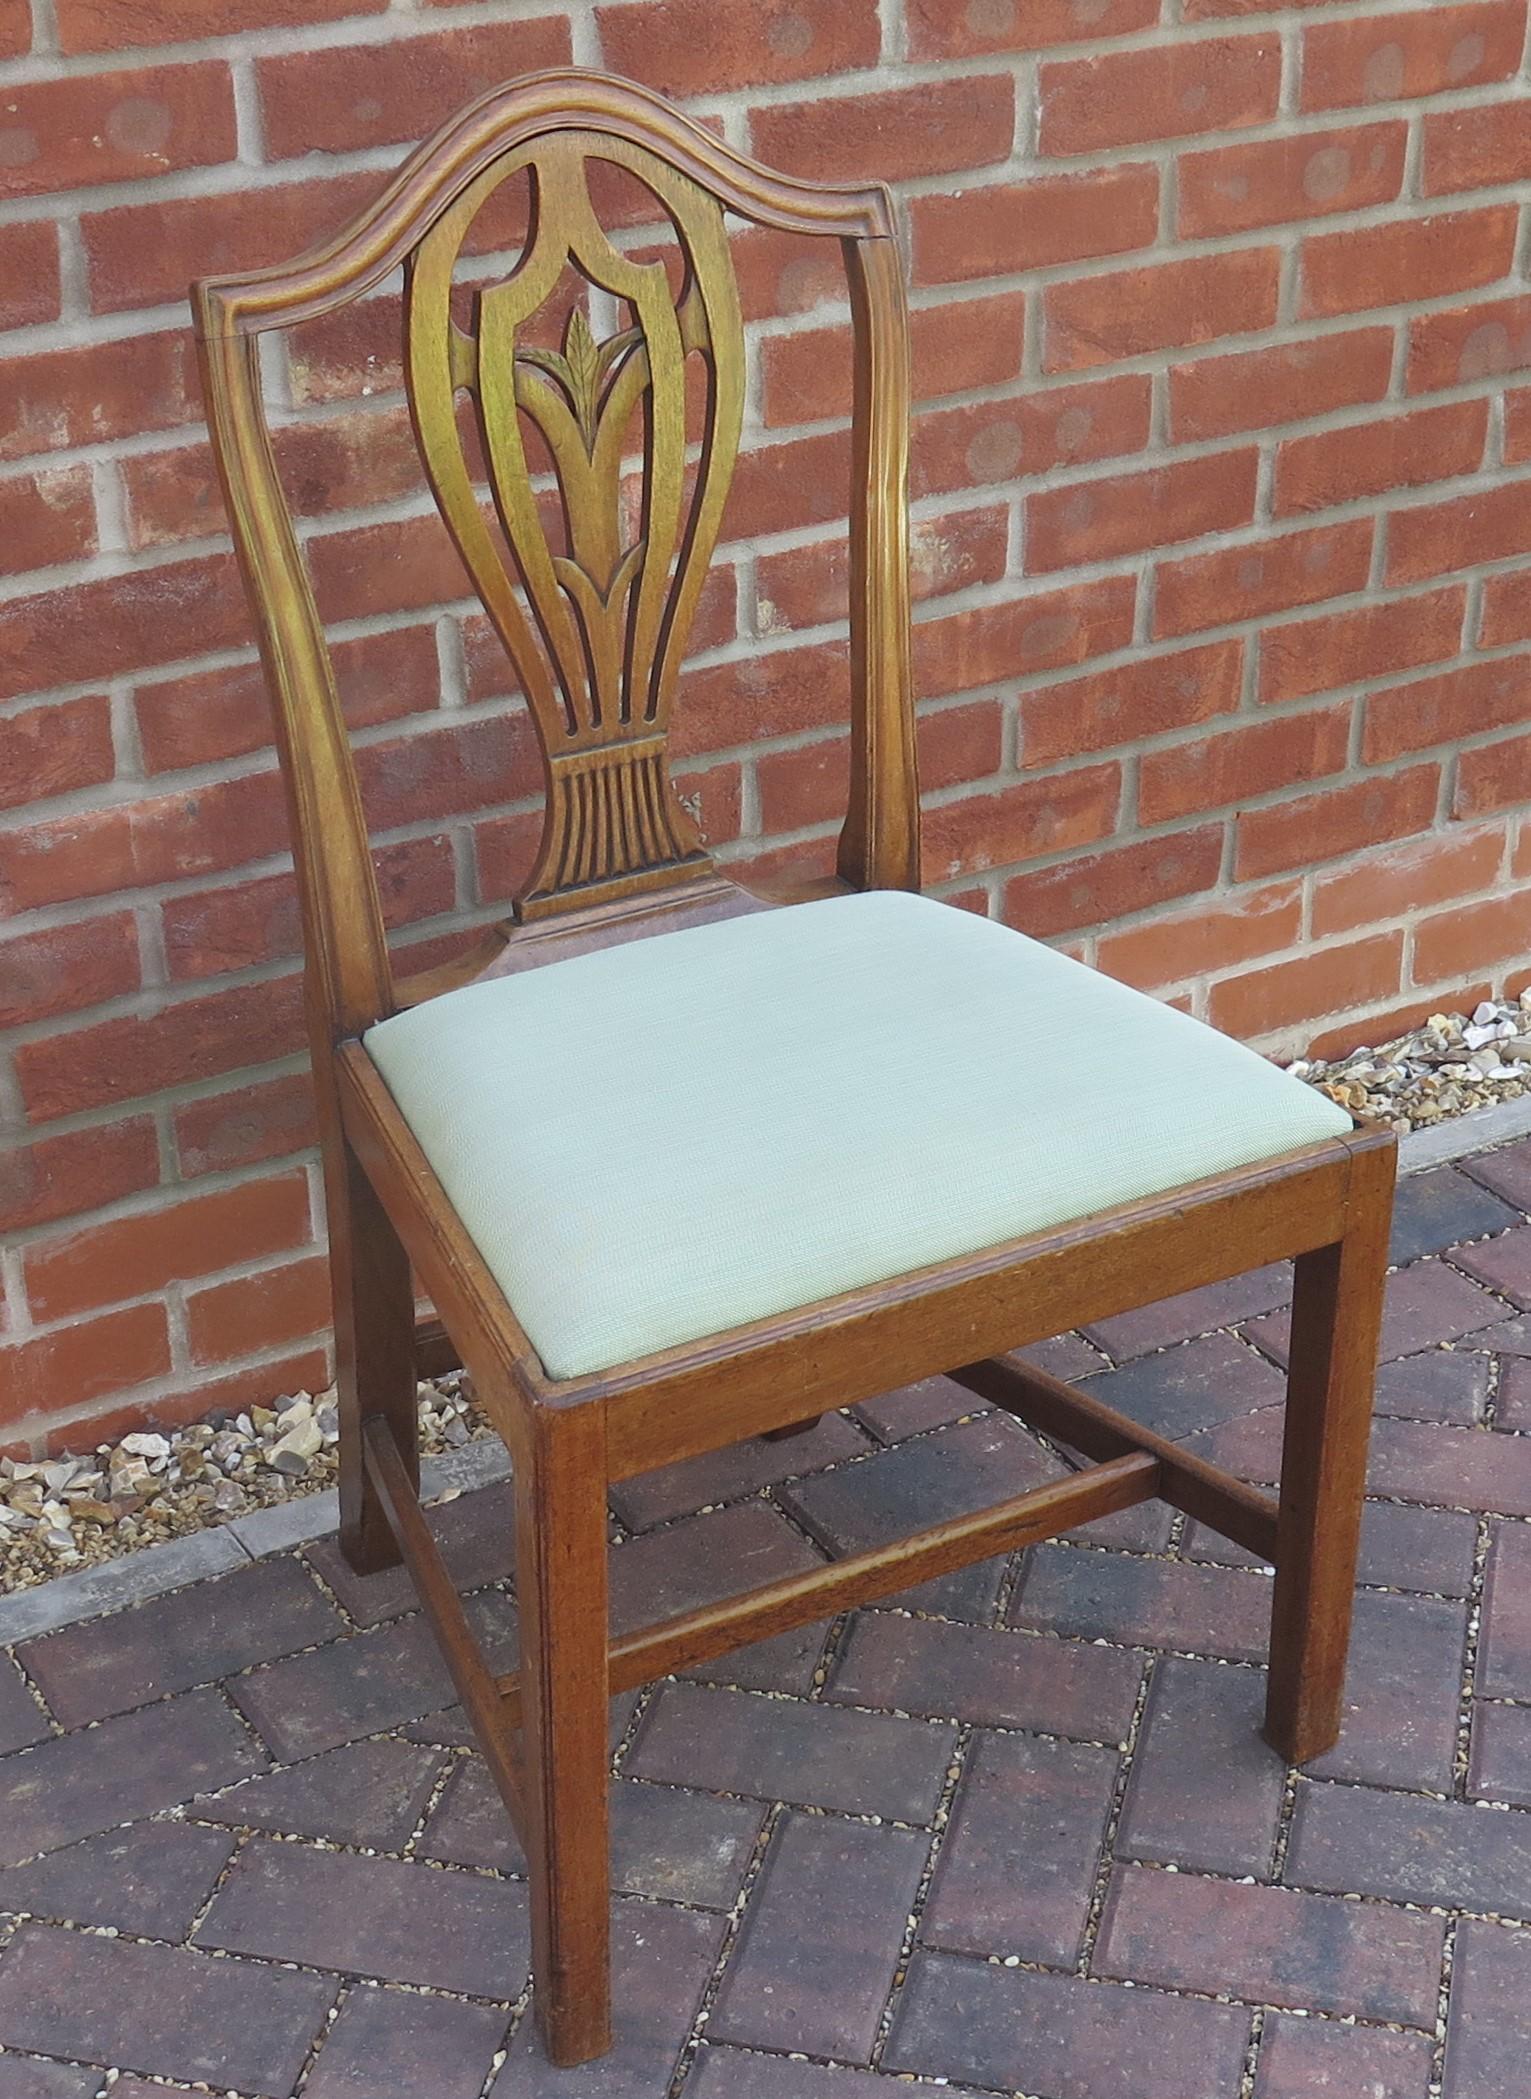 This is a very elegant, good quality Side or Dining Chair from the late 18th Century period, circa 1785. 

Camel back chairs of this date are popularly called Hepplewhite because very many chair makers followed the designs of George Hepplewhite,